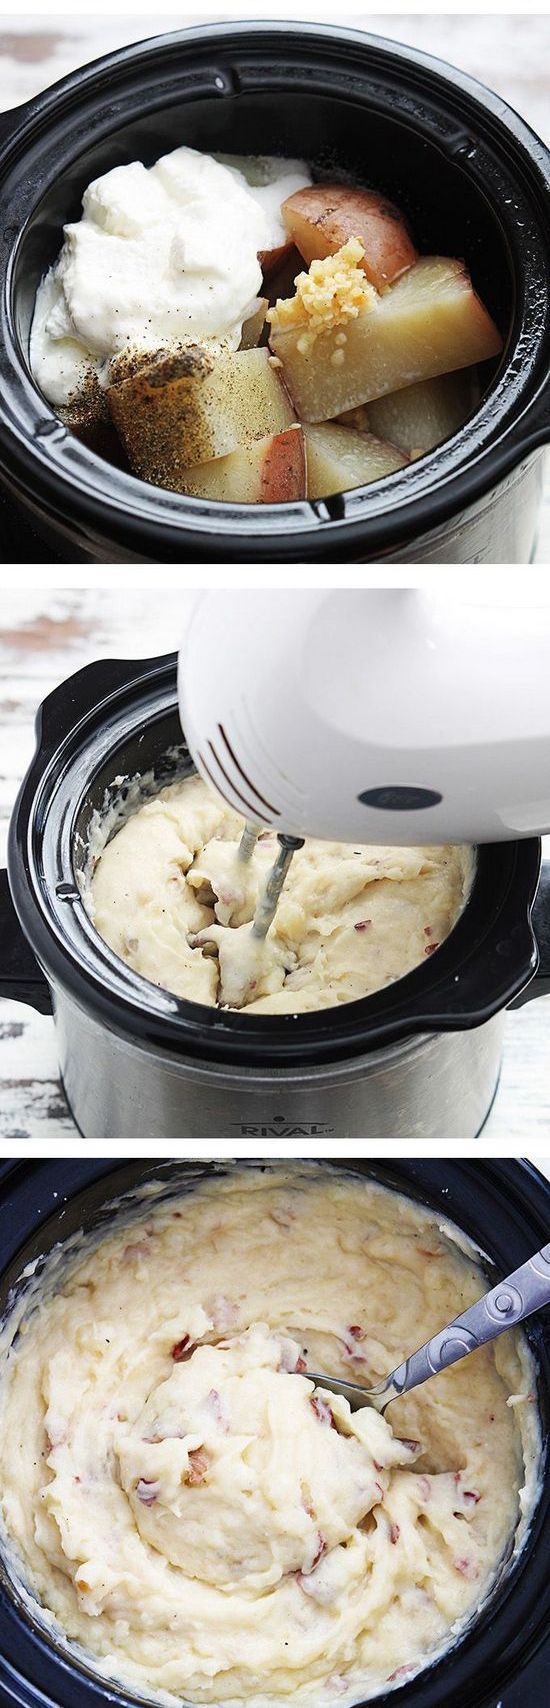 These slow cooker mashed potatoes will change your life. Creamy, tons of flavor, and seriously the easiest mashed potatoes you